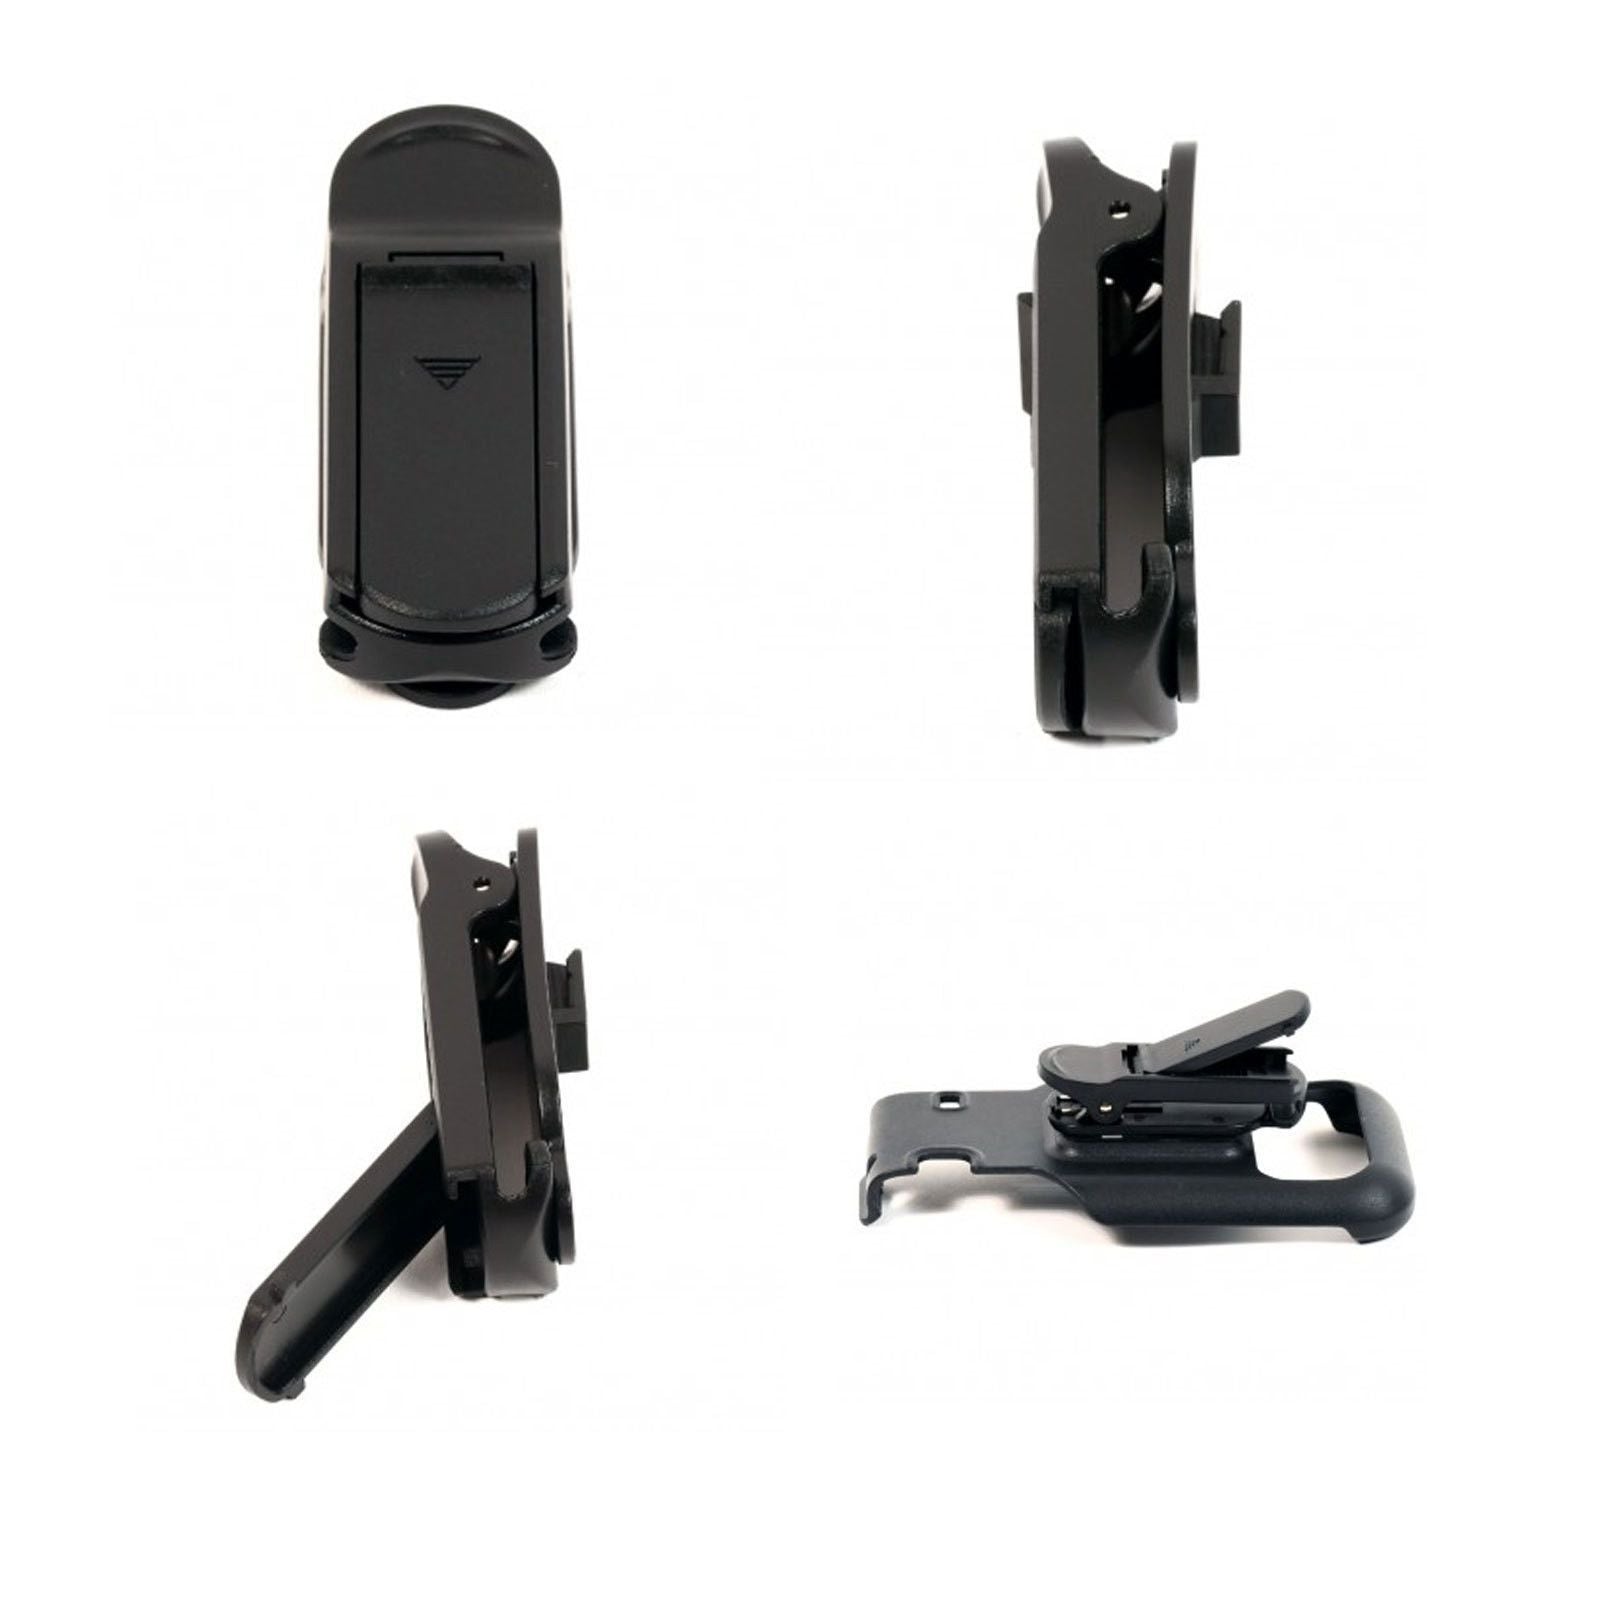 Ultimateaddons Belt Clip Attachment with integrated phone stand - Ultimateaddons